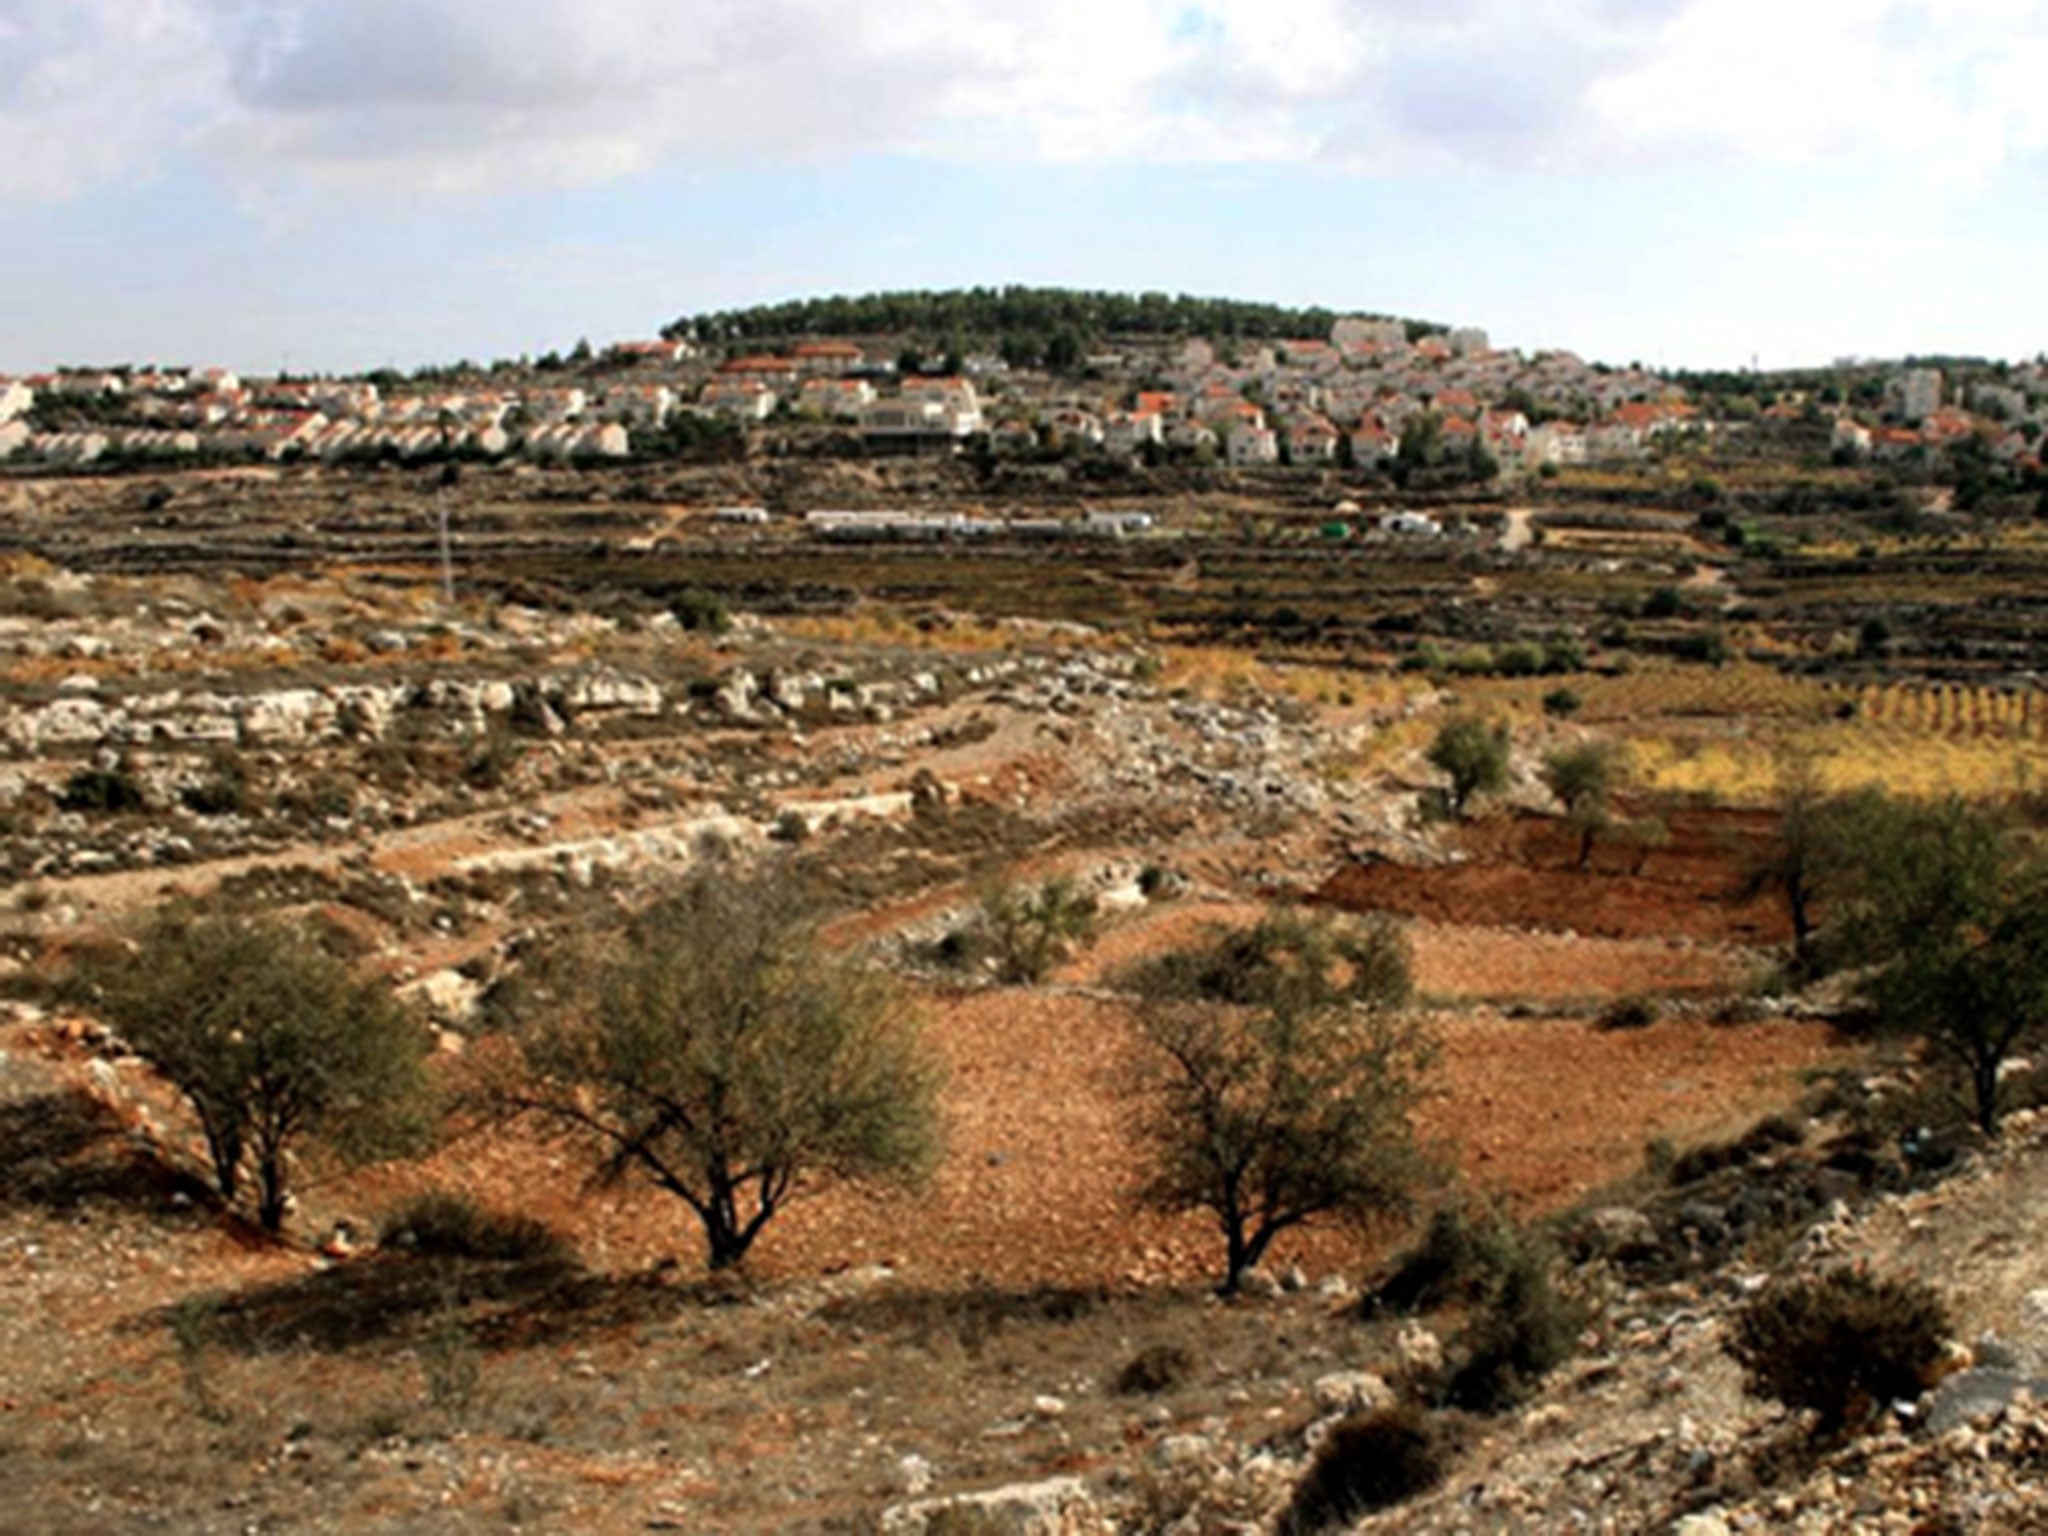 The land to be appropriated is in the Etzion settlement bloc near Bethlehem. Israel has declared it "state land, on the instructions of the political echelon" 